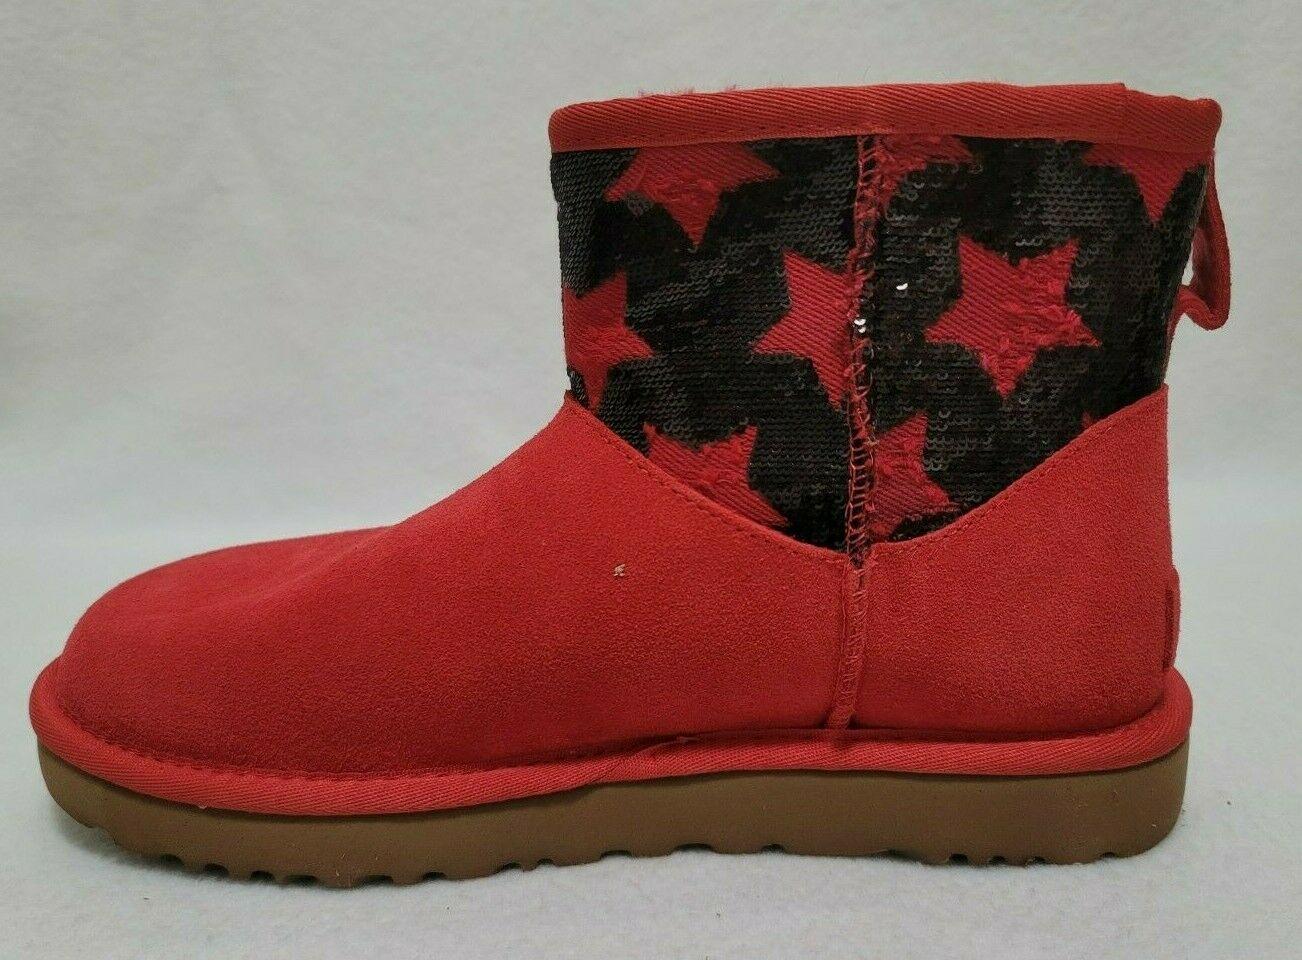 UGG Classic Mini Sequin Star Sheepwool Red UGG Boots Women’s Size US 7  EUR 38 - SVNYFancy